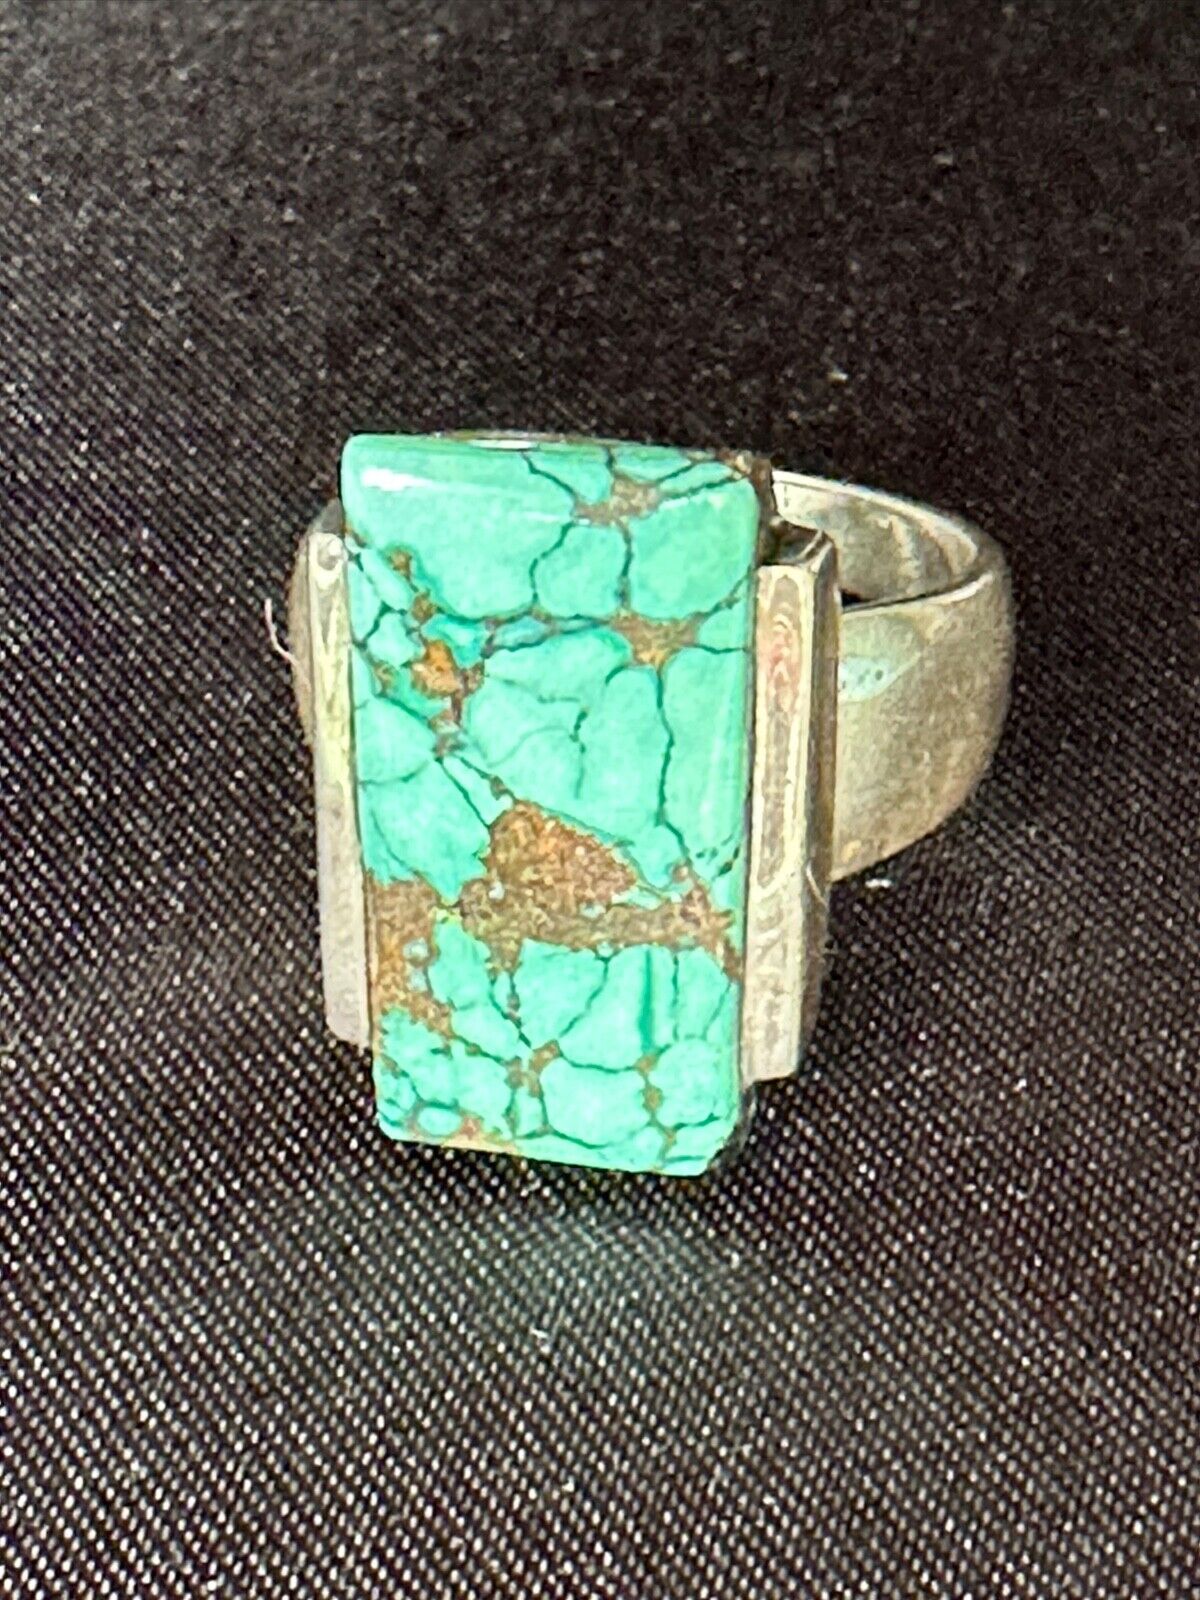 Superb Vintage Sterling Silver 925 Ring by VG - Greenish-blue Turquoise stone